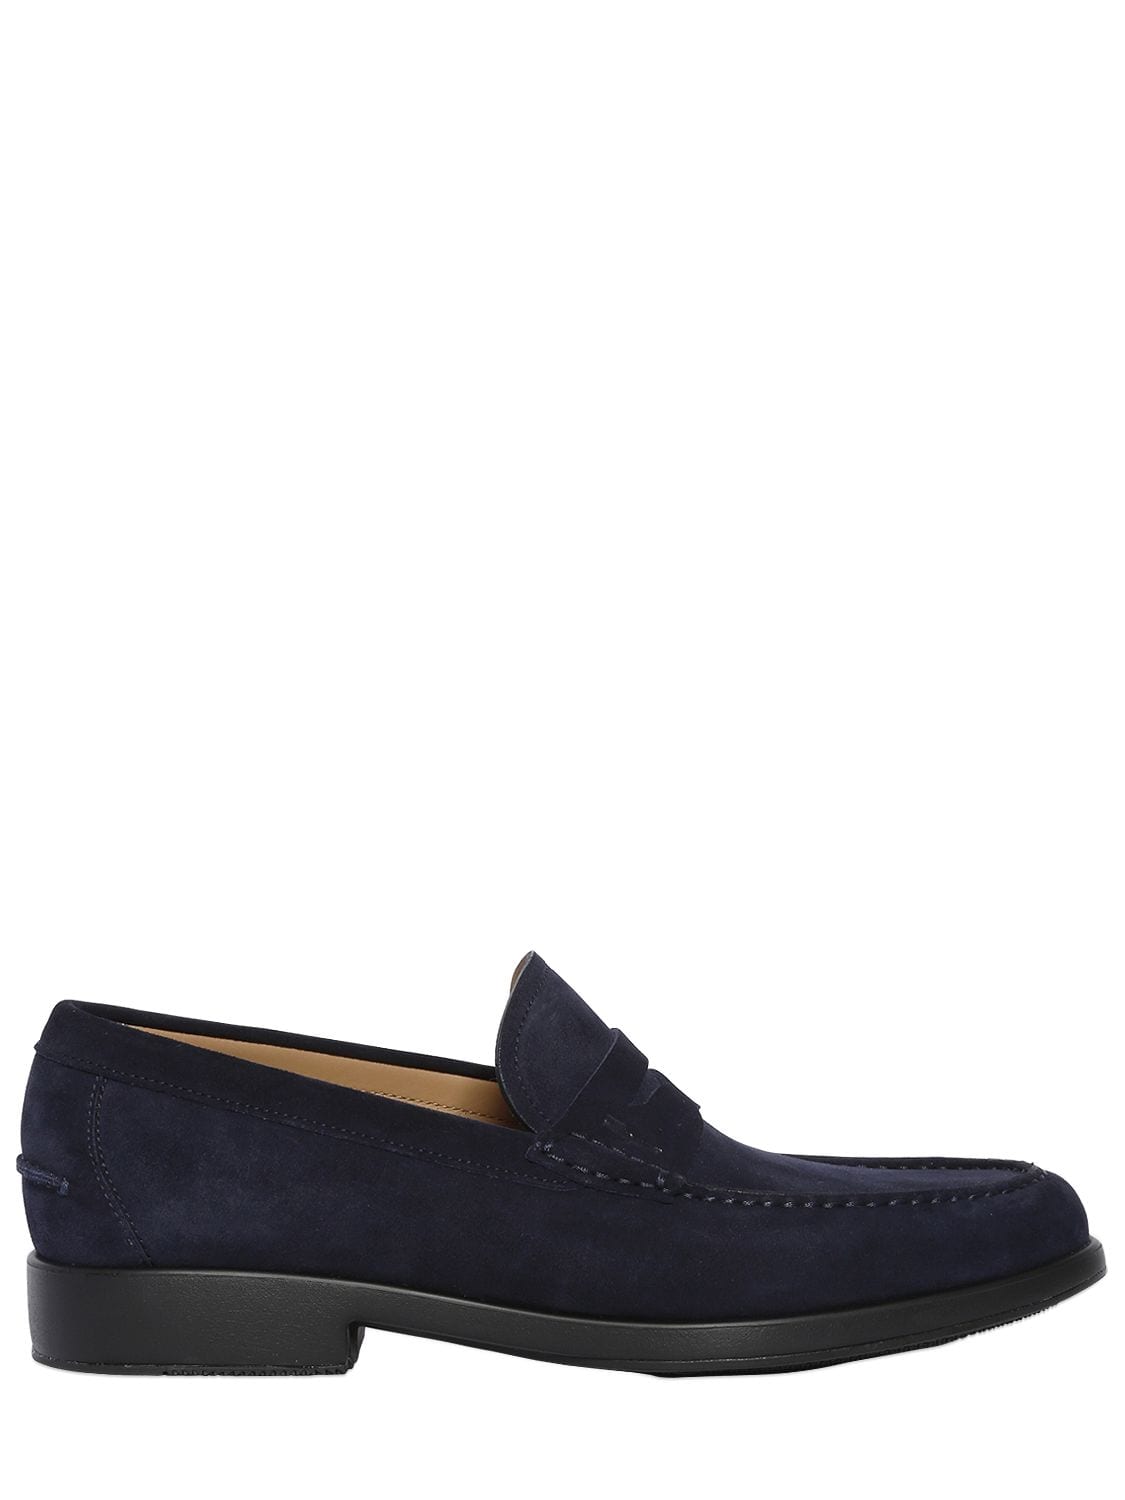 EXTRA LIGHT SUEDE PENNY LOAFERS